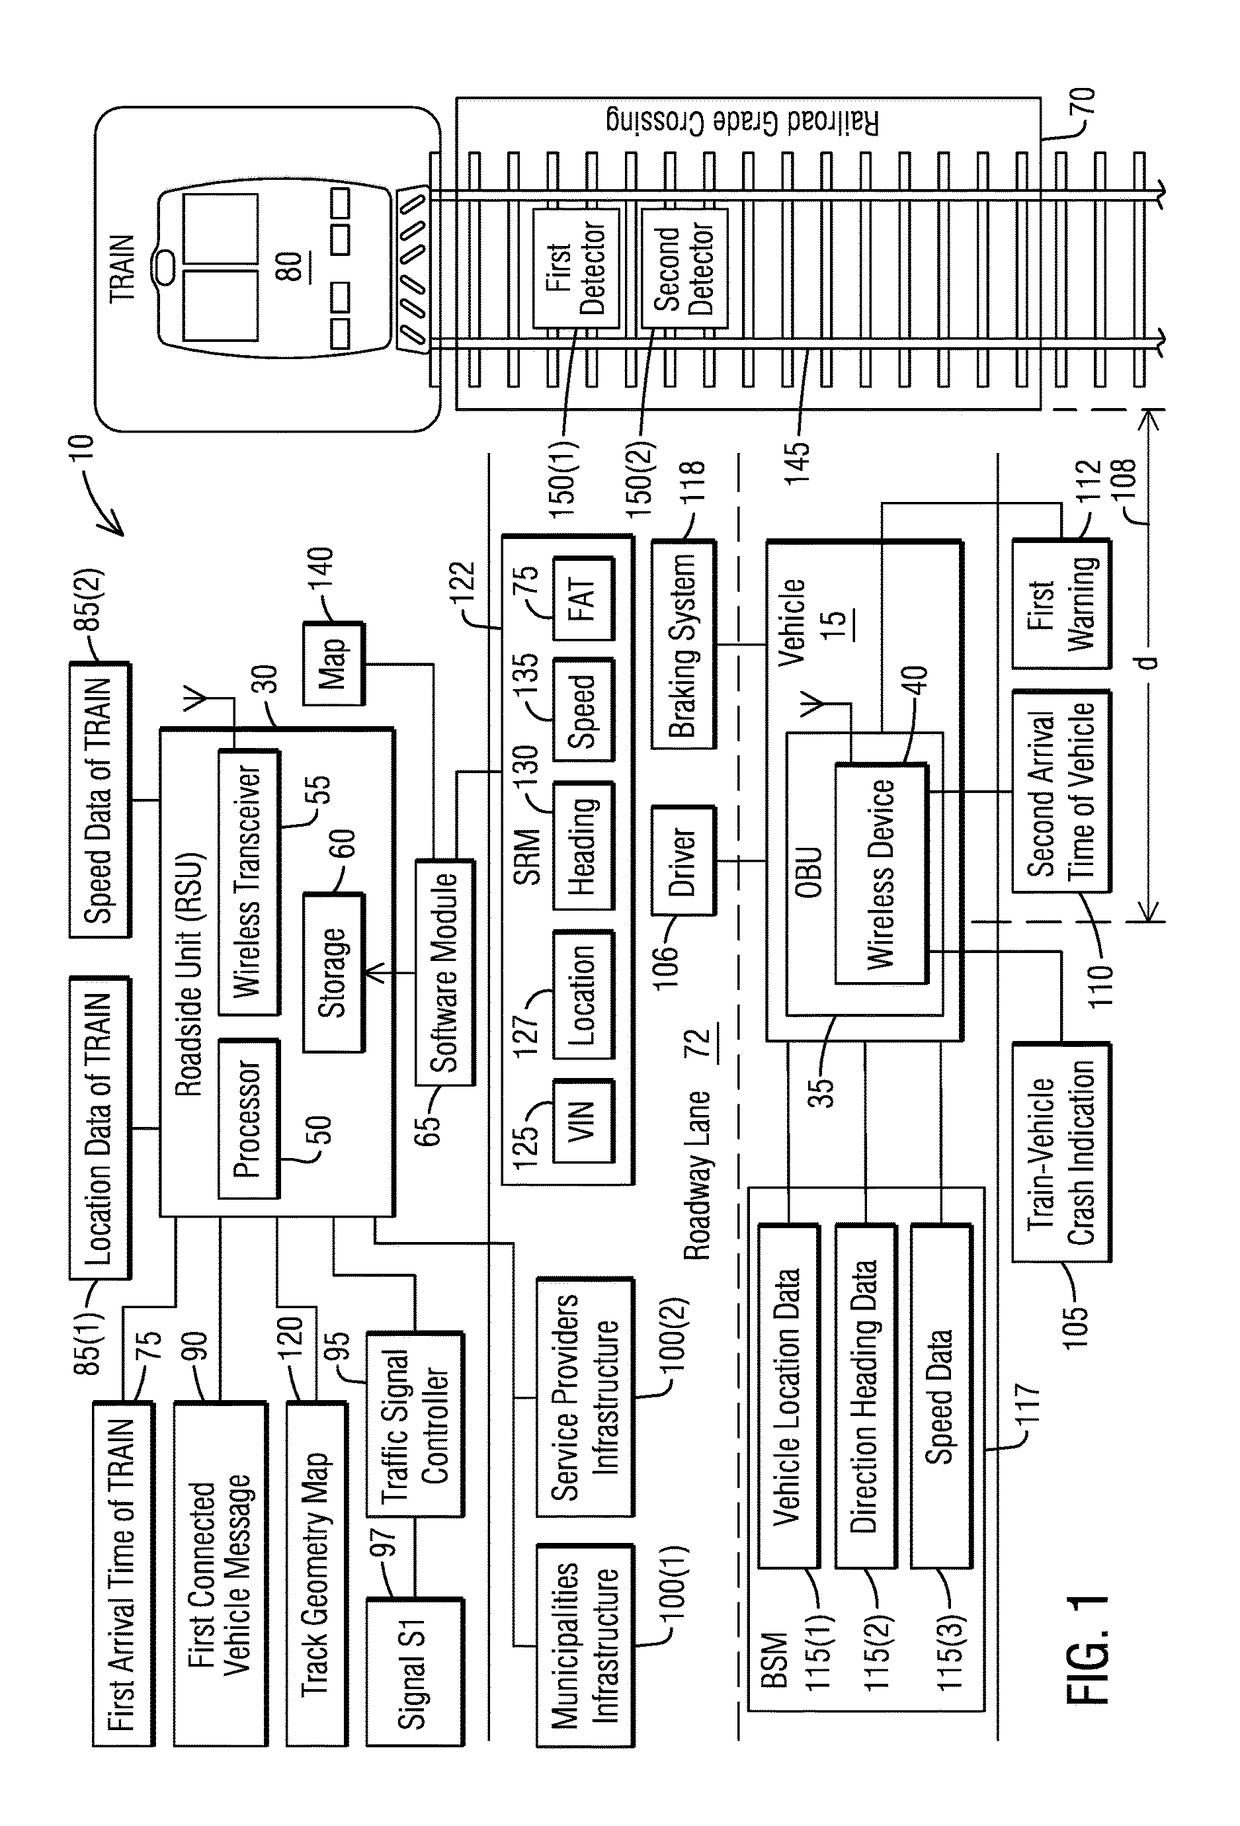 Connected vehicle traffic safety system and a method of predicting and avoiding crashes at railroad grade crossings